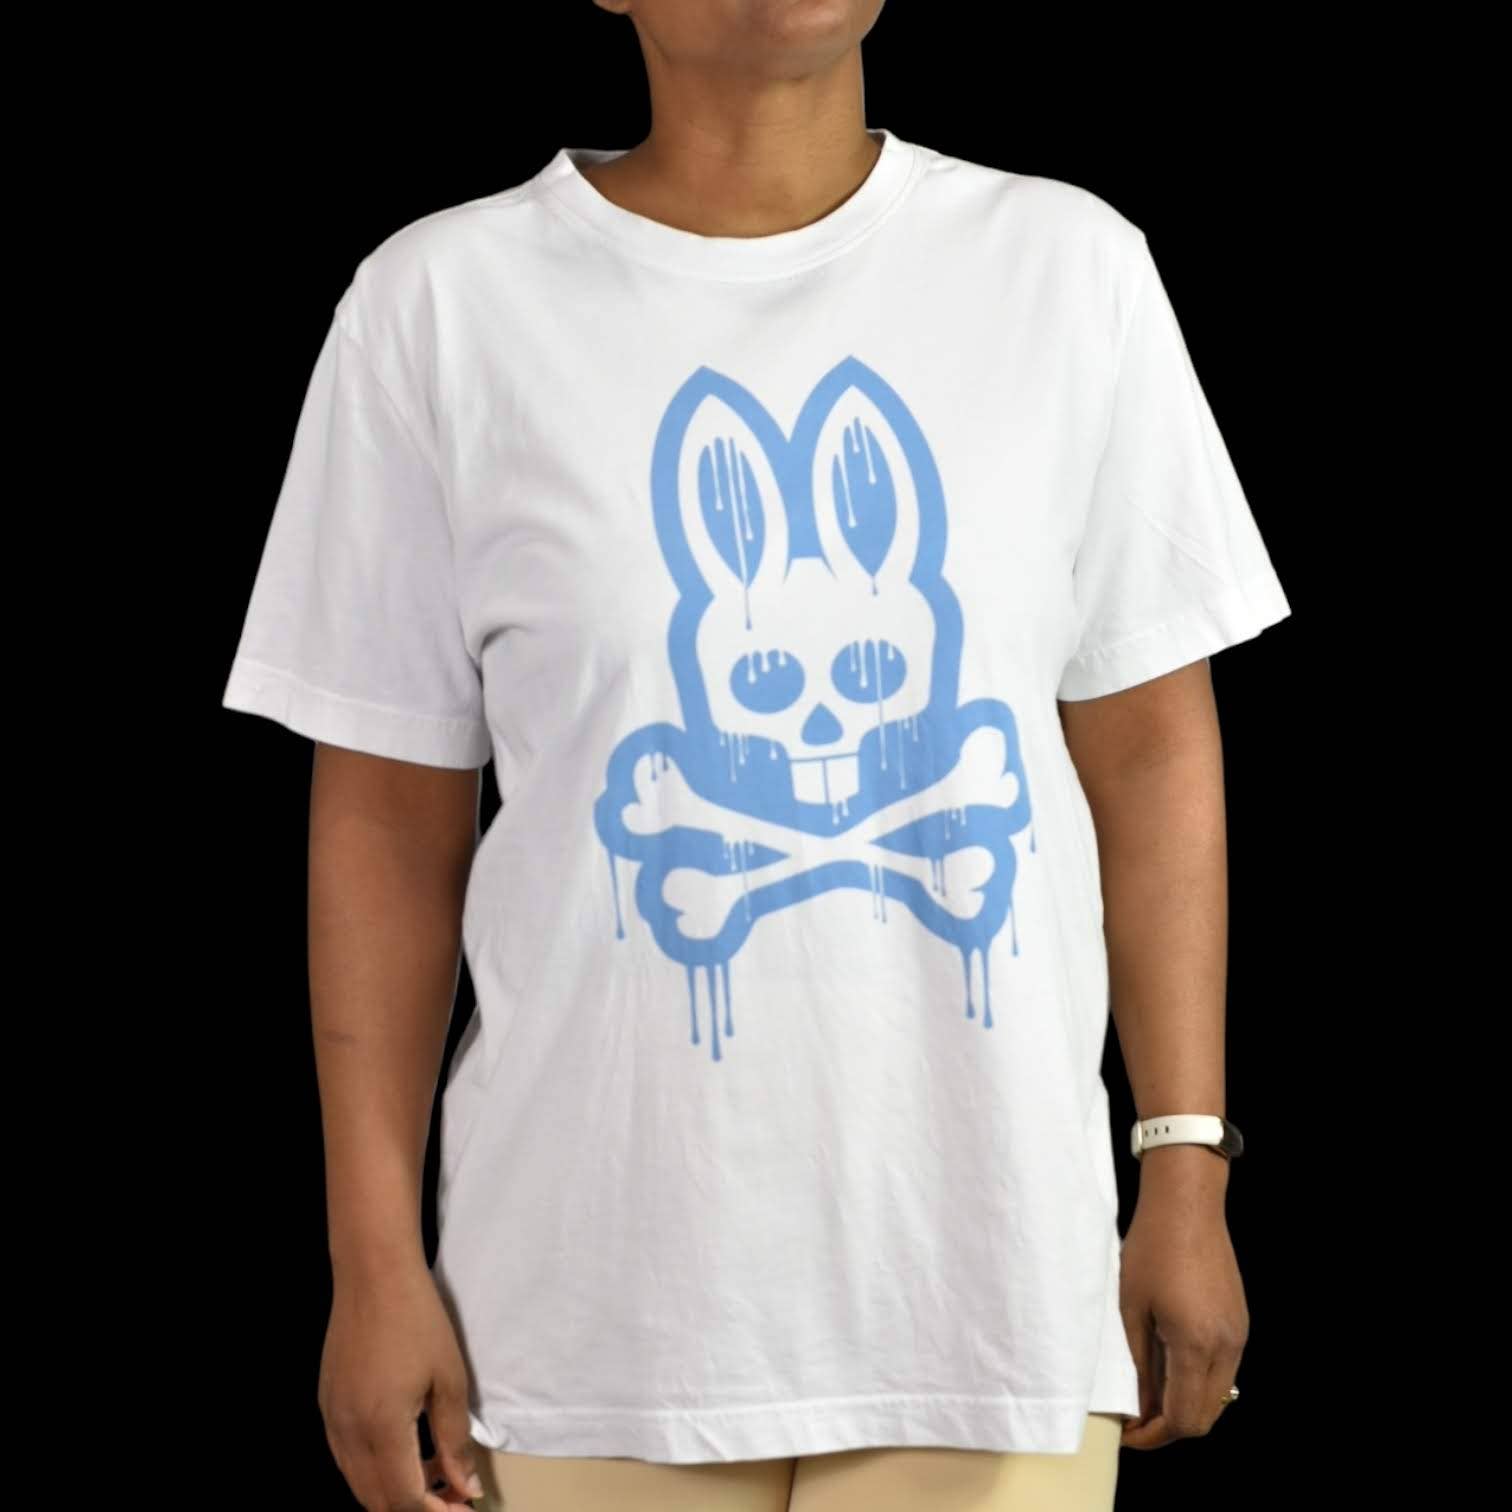 Psycho Bunny Tee Shirt Dripping Graphic White Blue Crew Neck Short Sleeve Size Small Mens